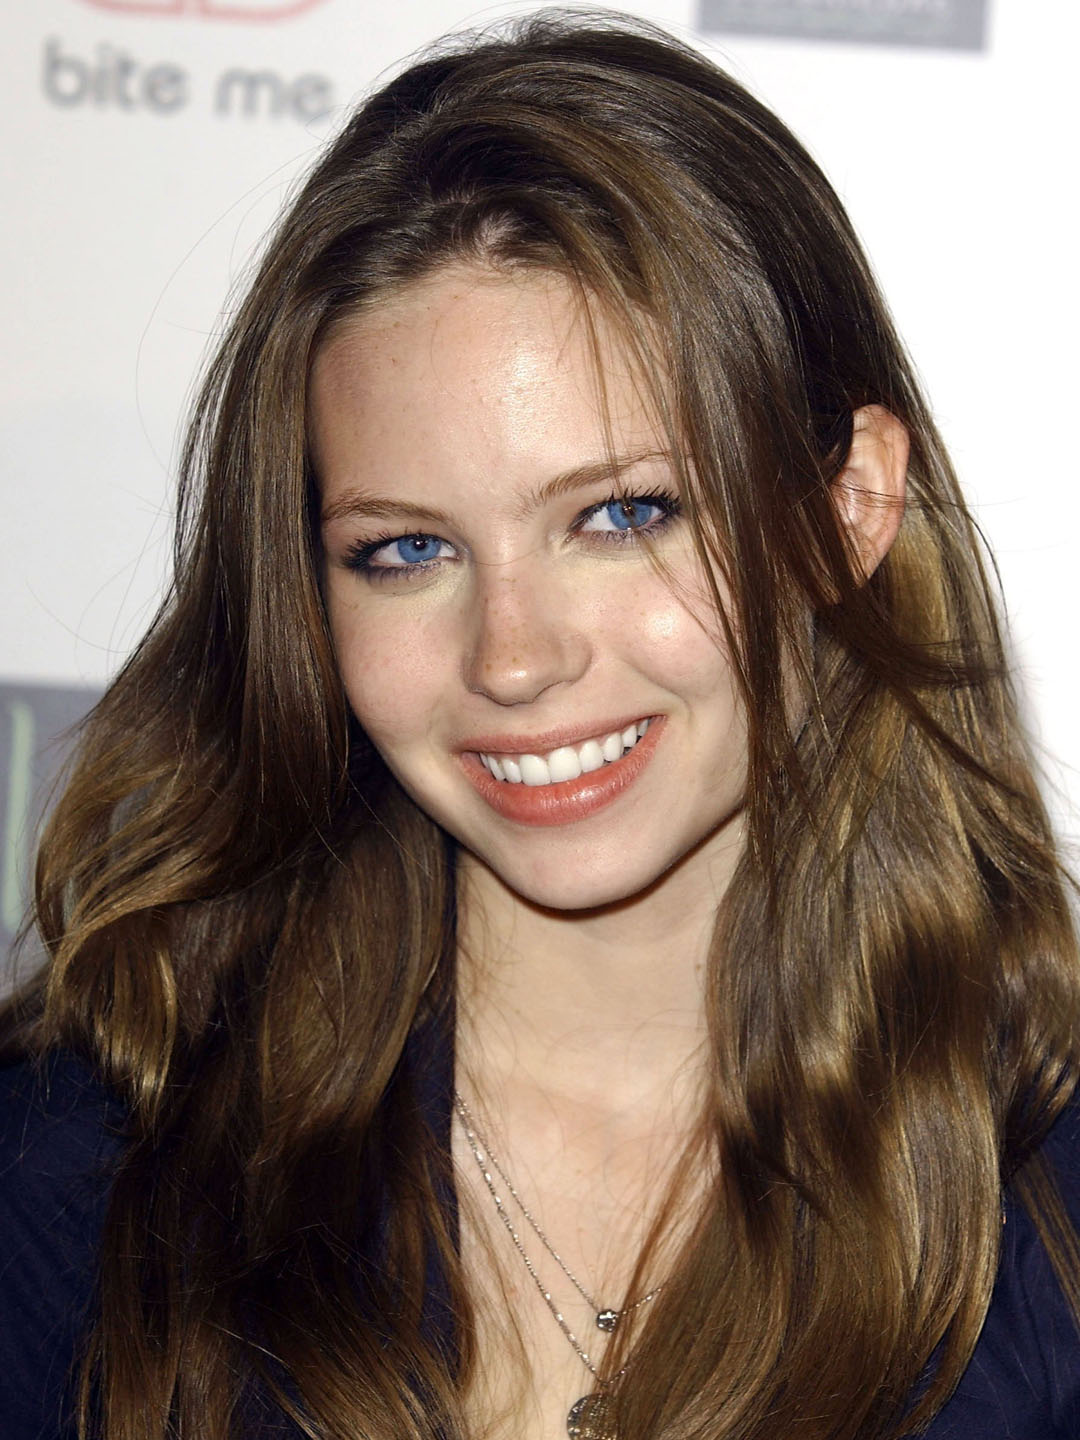 daveigh chase lilo and stitch